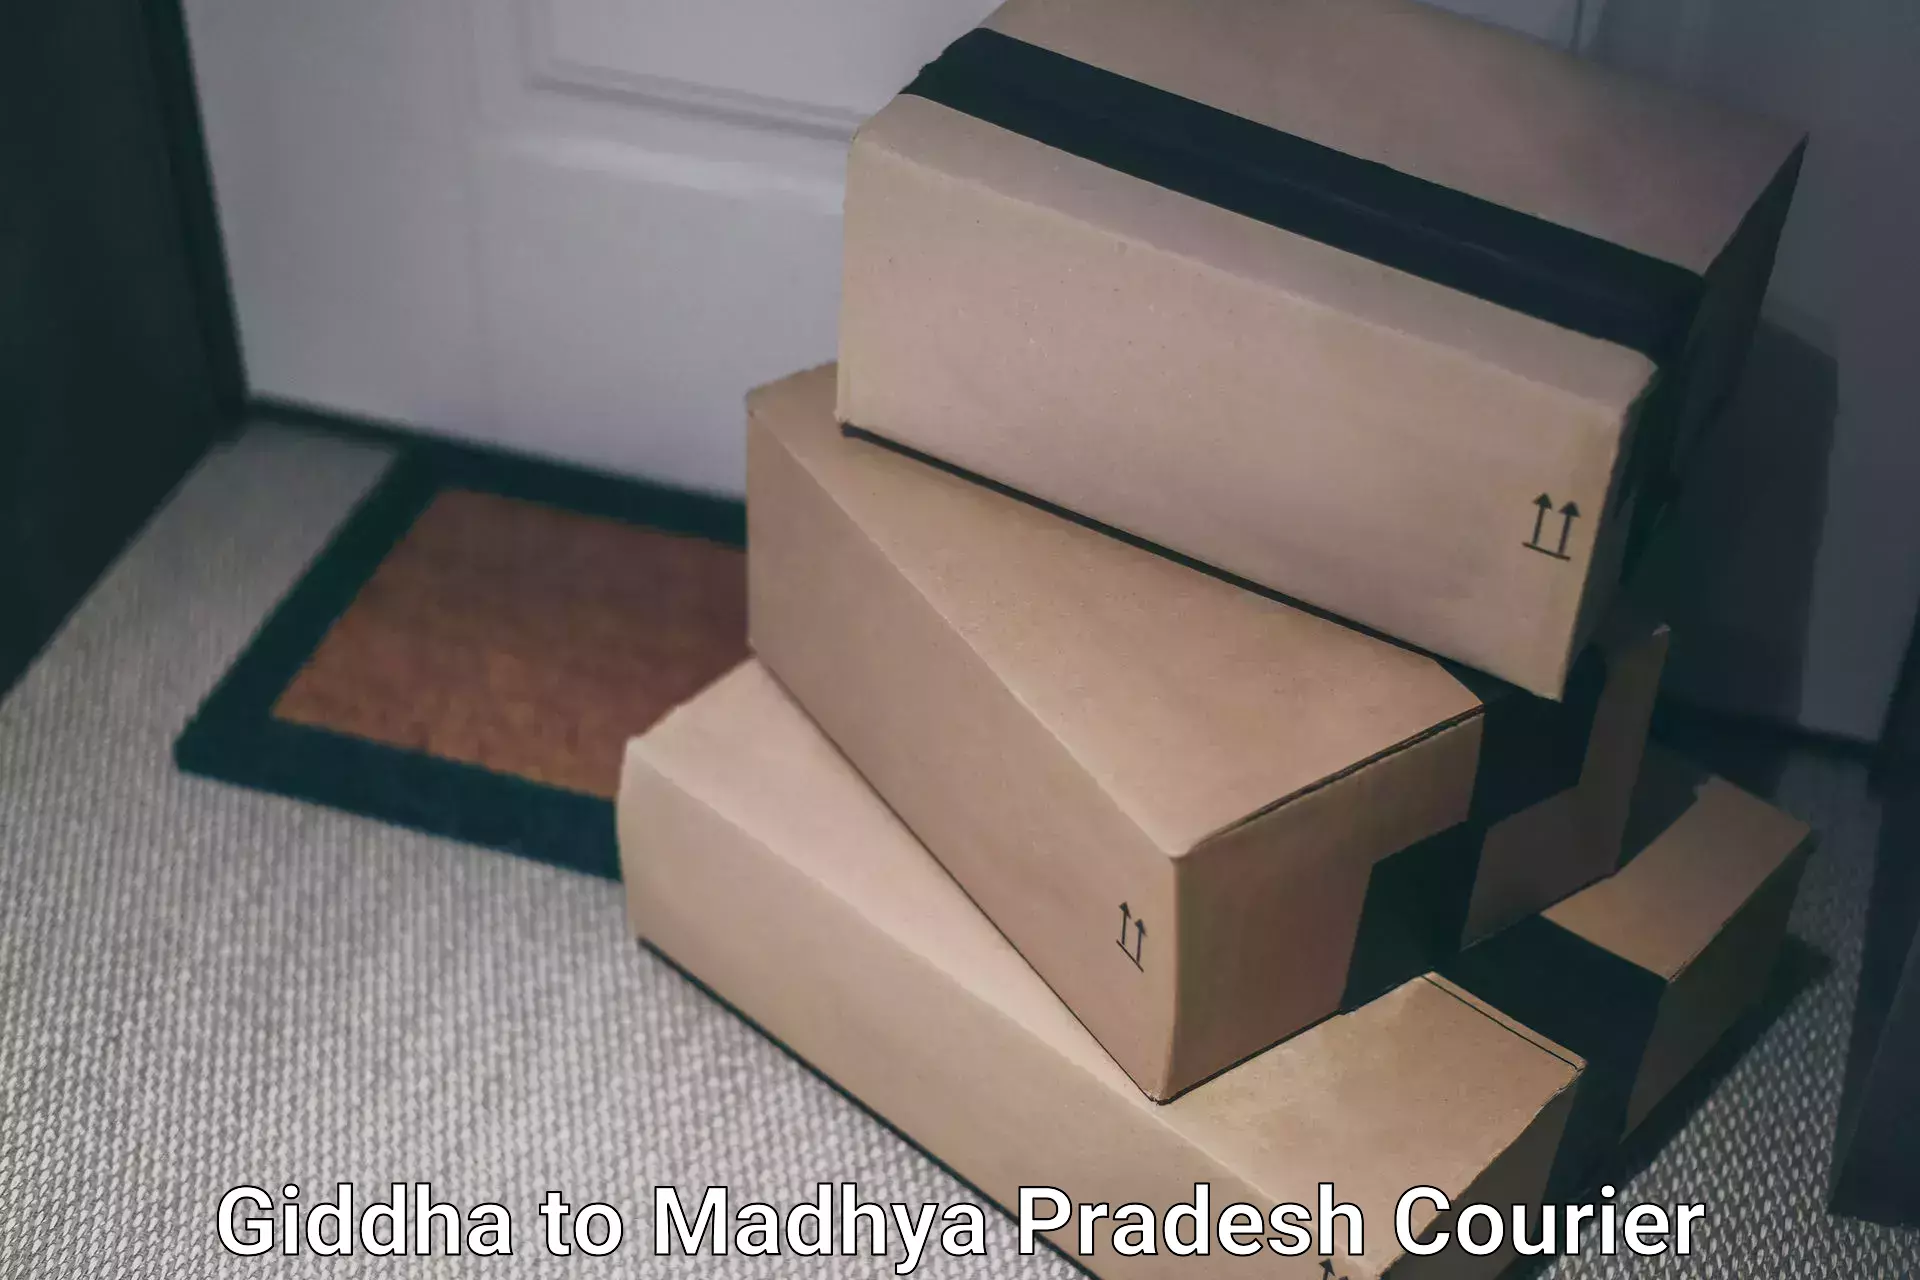 24-hour courier services in Giddha to Neemuch